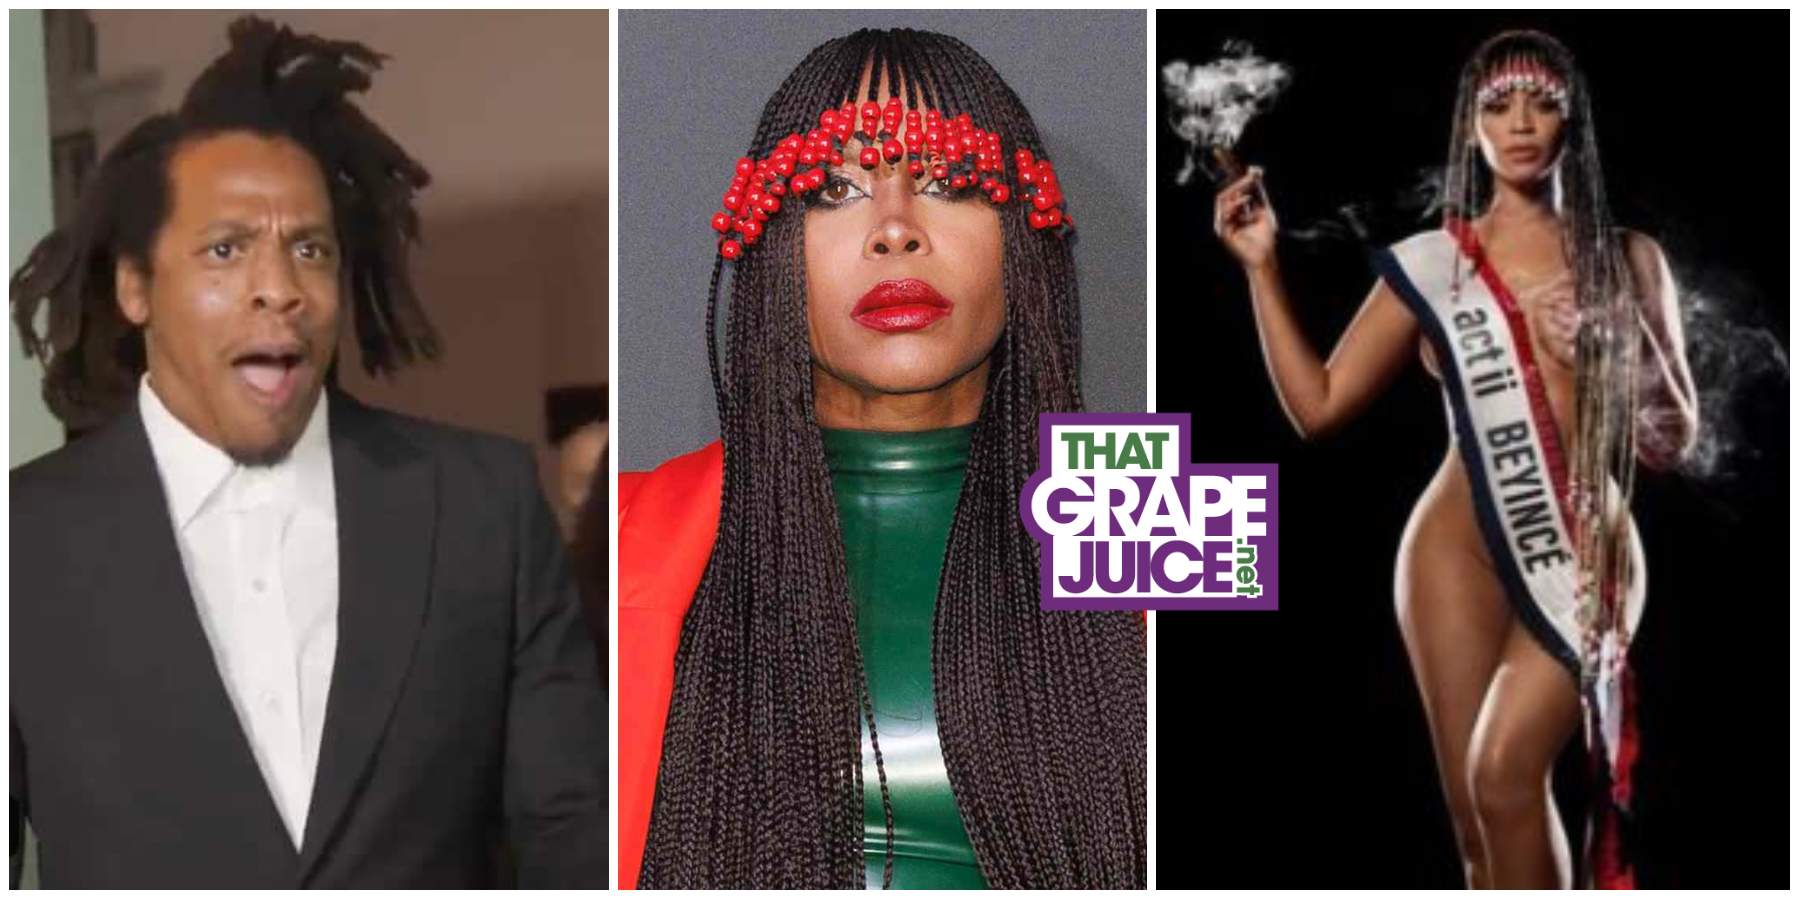 Erykah Badu Reacts to #Beyhive Attack Over Perceived Diss to Beyonce’s ‘Cowboy Carter’ Cover: “JAY-Z…You Gone Let These Bees Do This?”